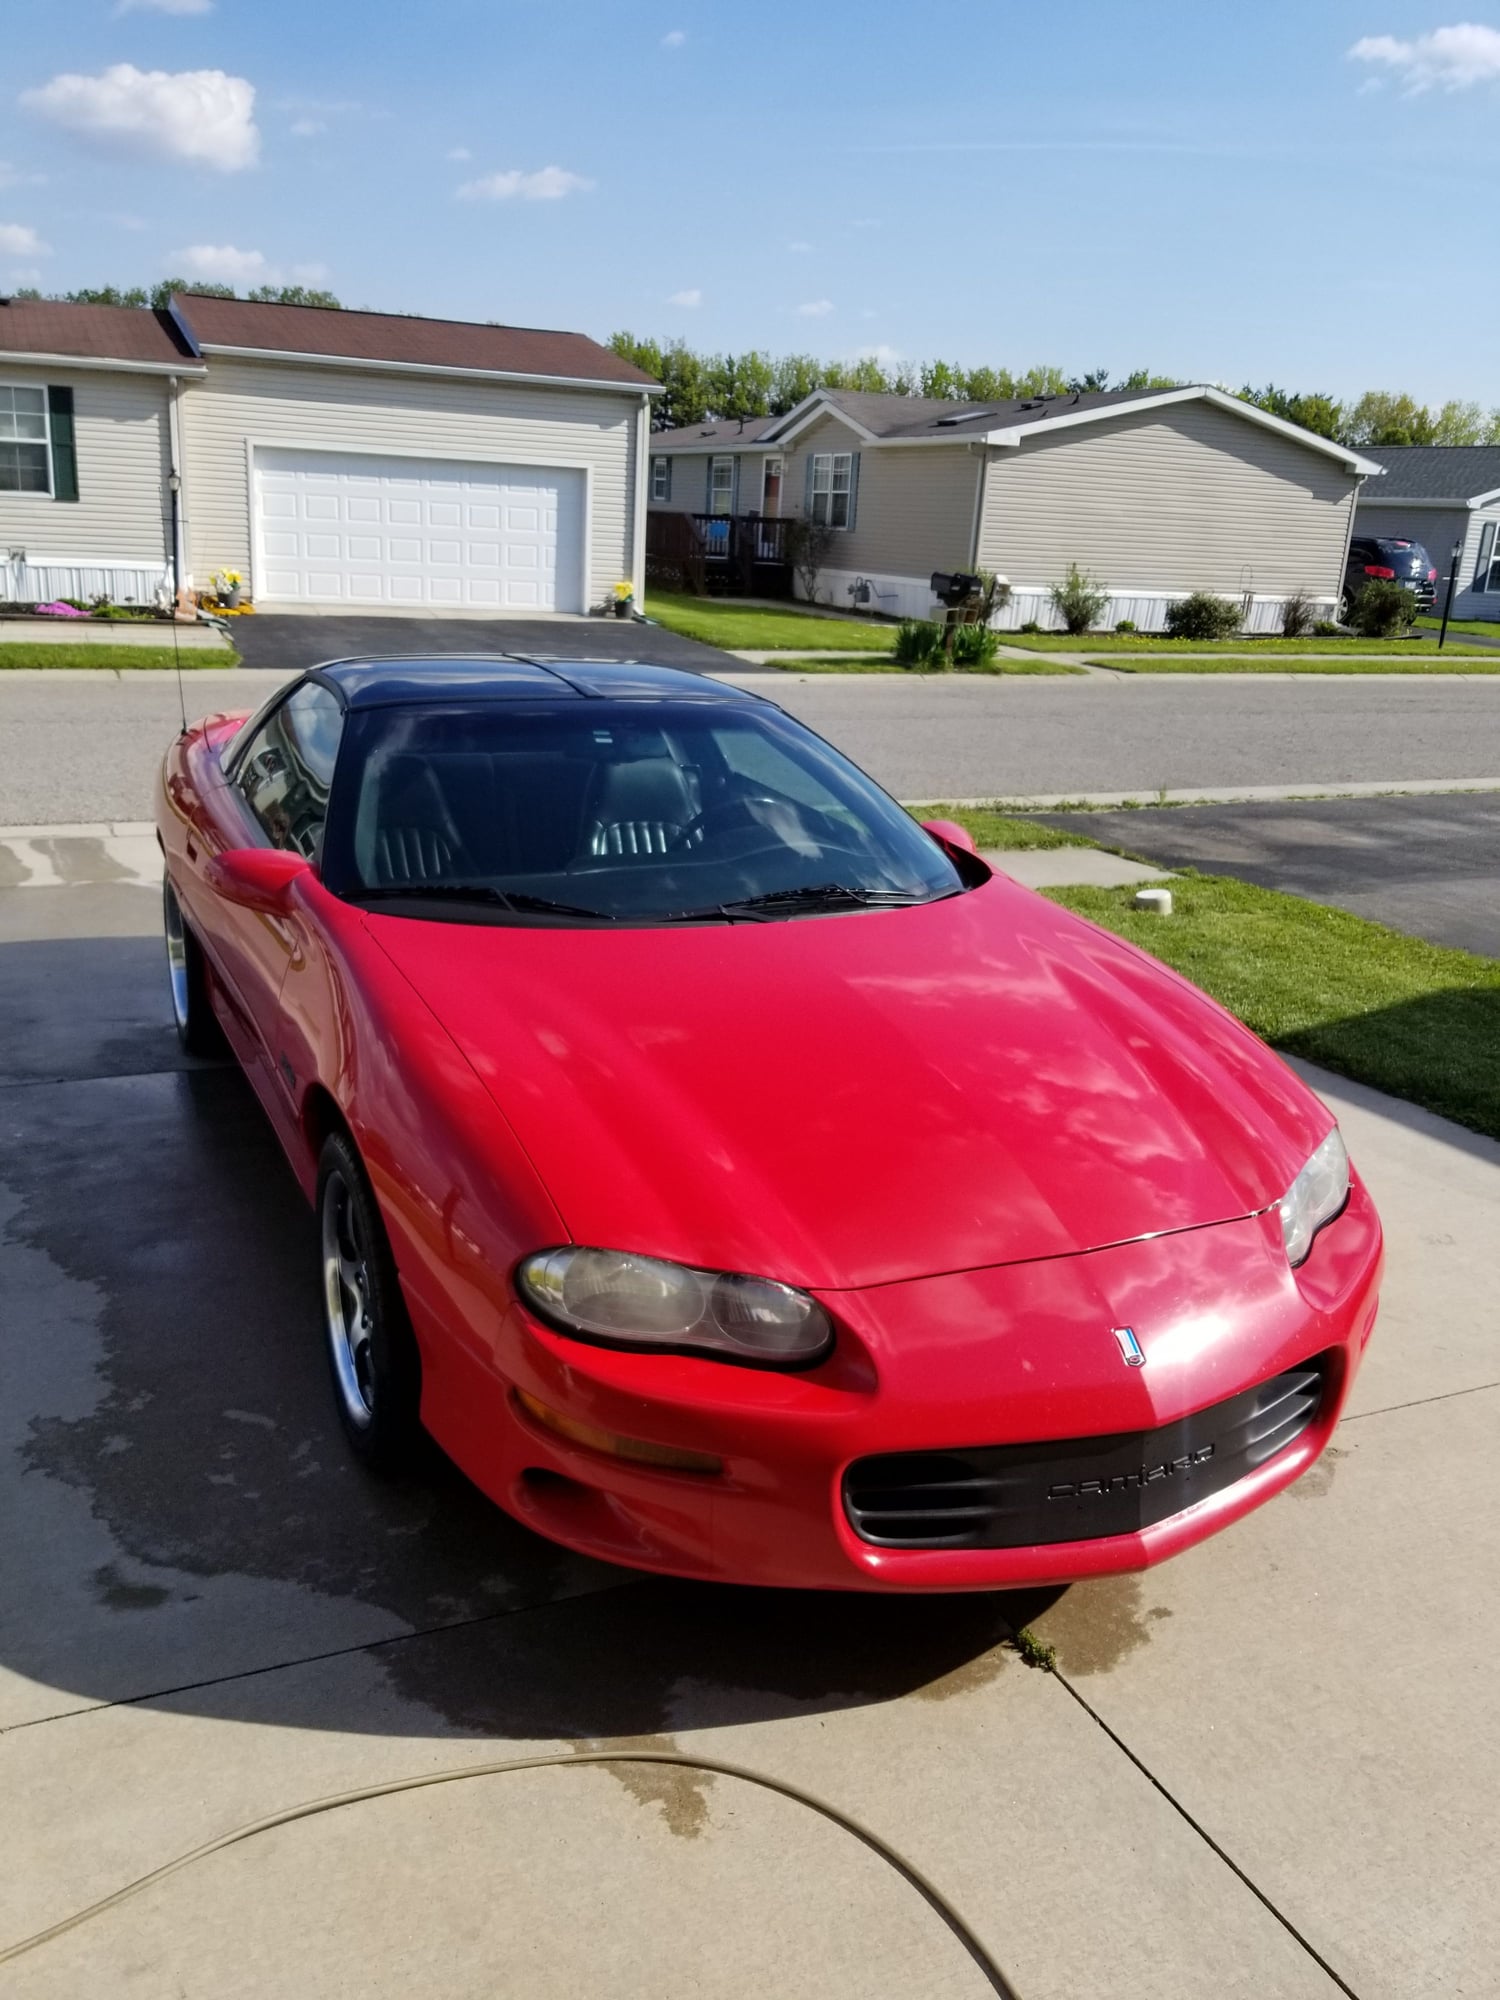 2000 Chevrolet Camaro - 2000 Chevrolet Camaro Z28 H/C/I - Used - VIN 2G1FP22G2Y2175137 - 100,000 Miles - 8 cyl - 2WD - Manual - Coupe - Red - Delta, OH 43515, United States